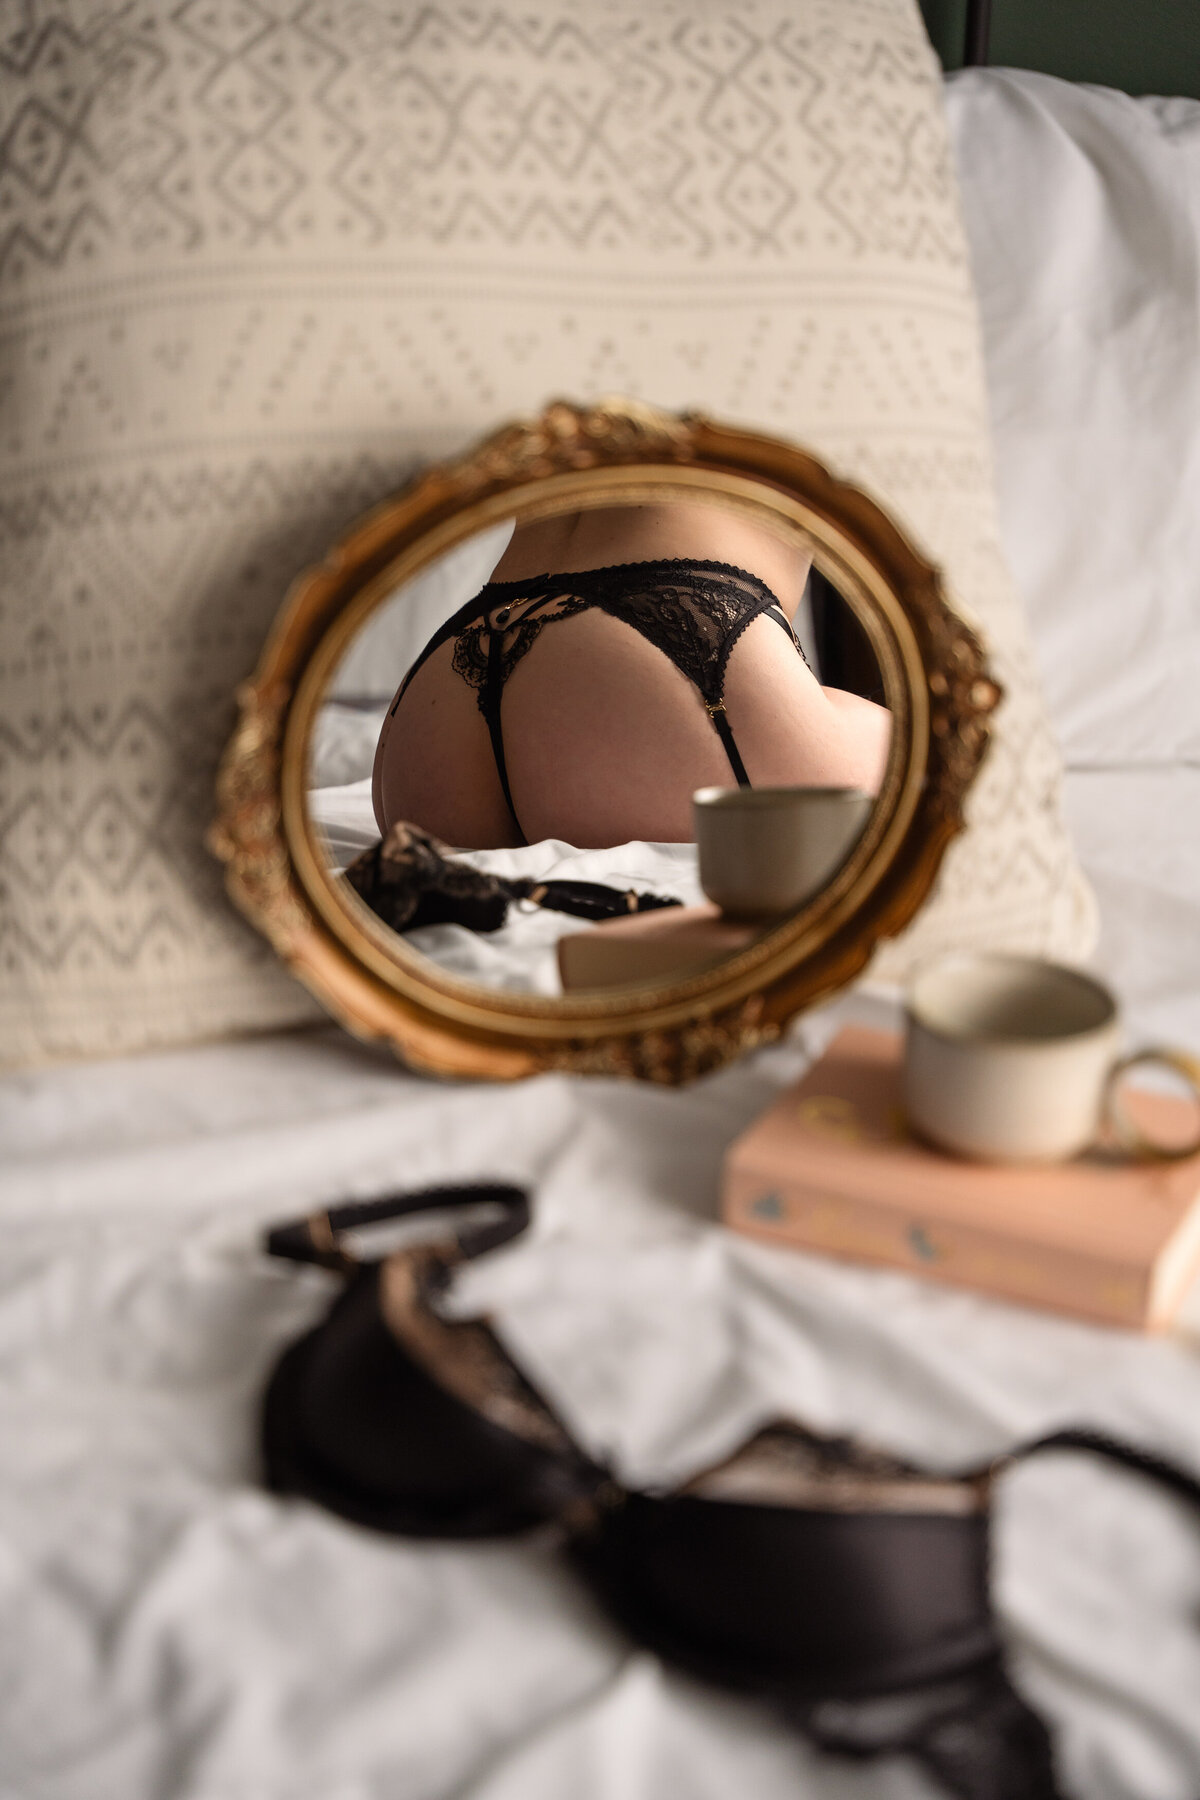 bra, book and coffee on a bed with a mirror showing the reflection of a butt